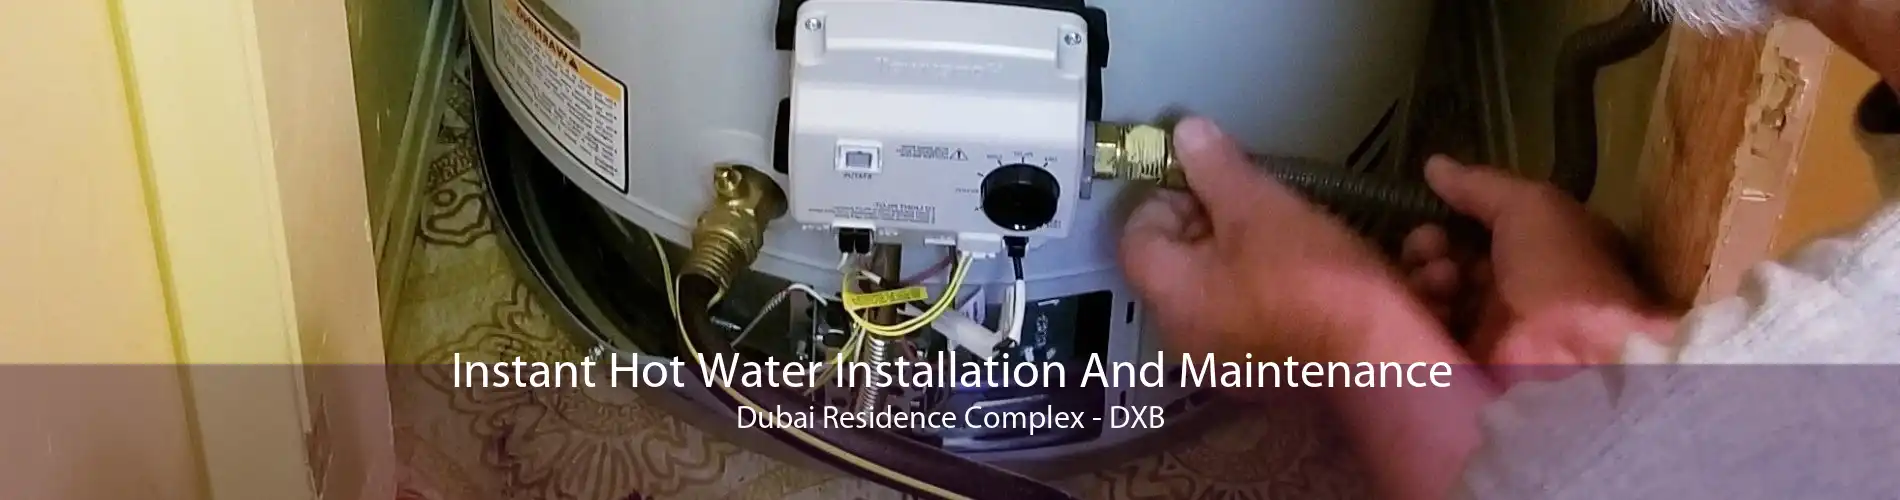 Instant Hot Water Installation And Maintenance Dubai Residence Complex - DXB